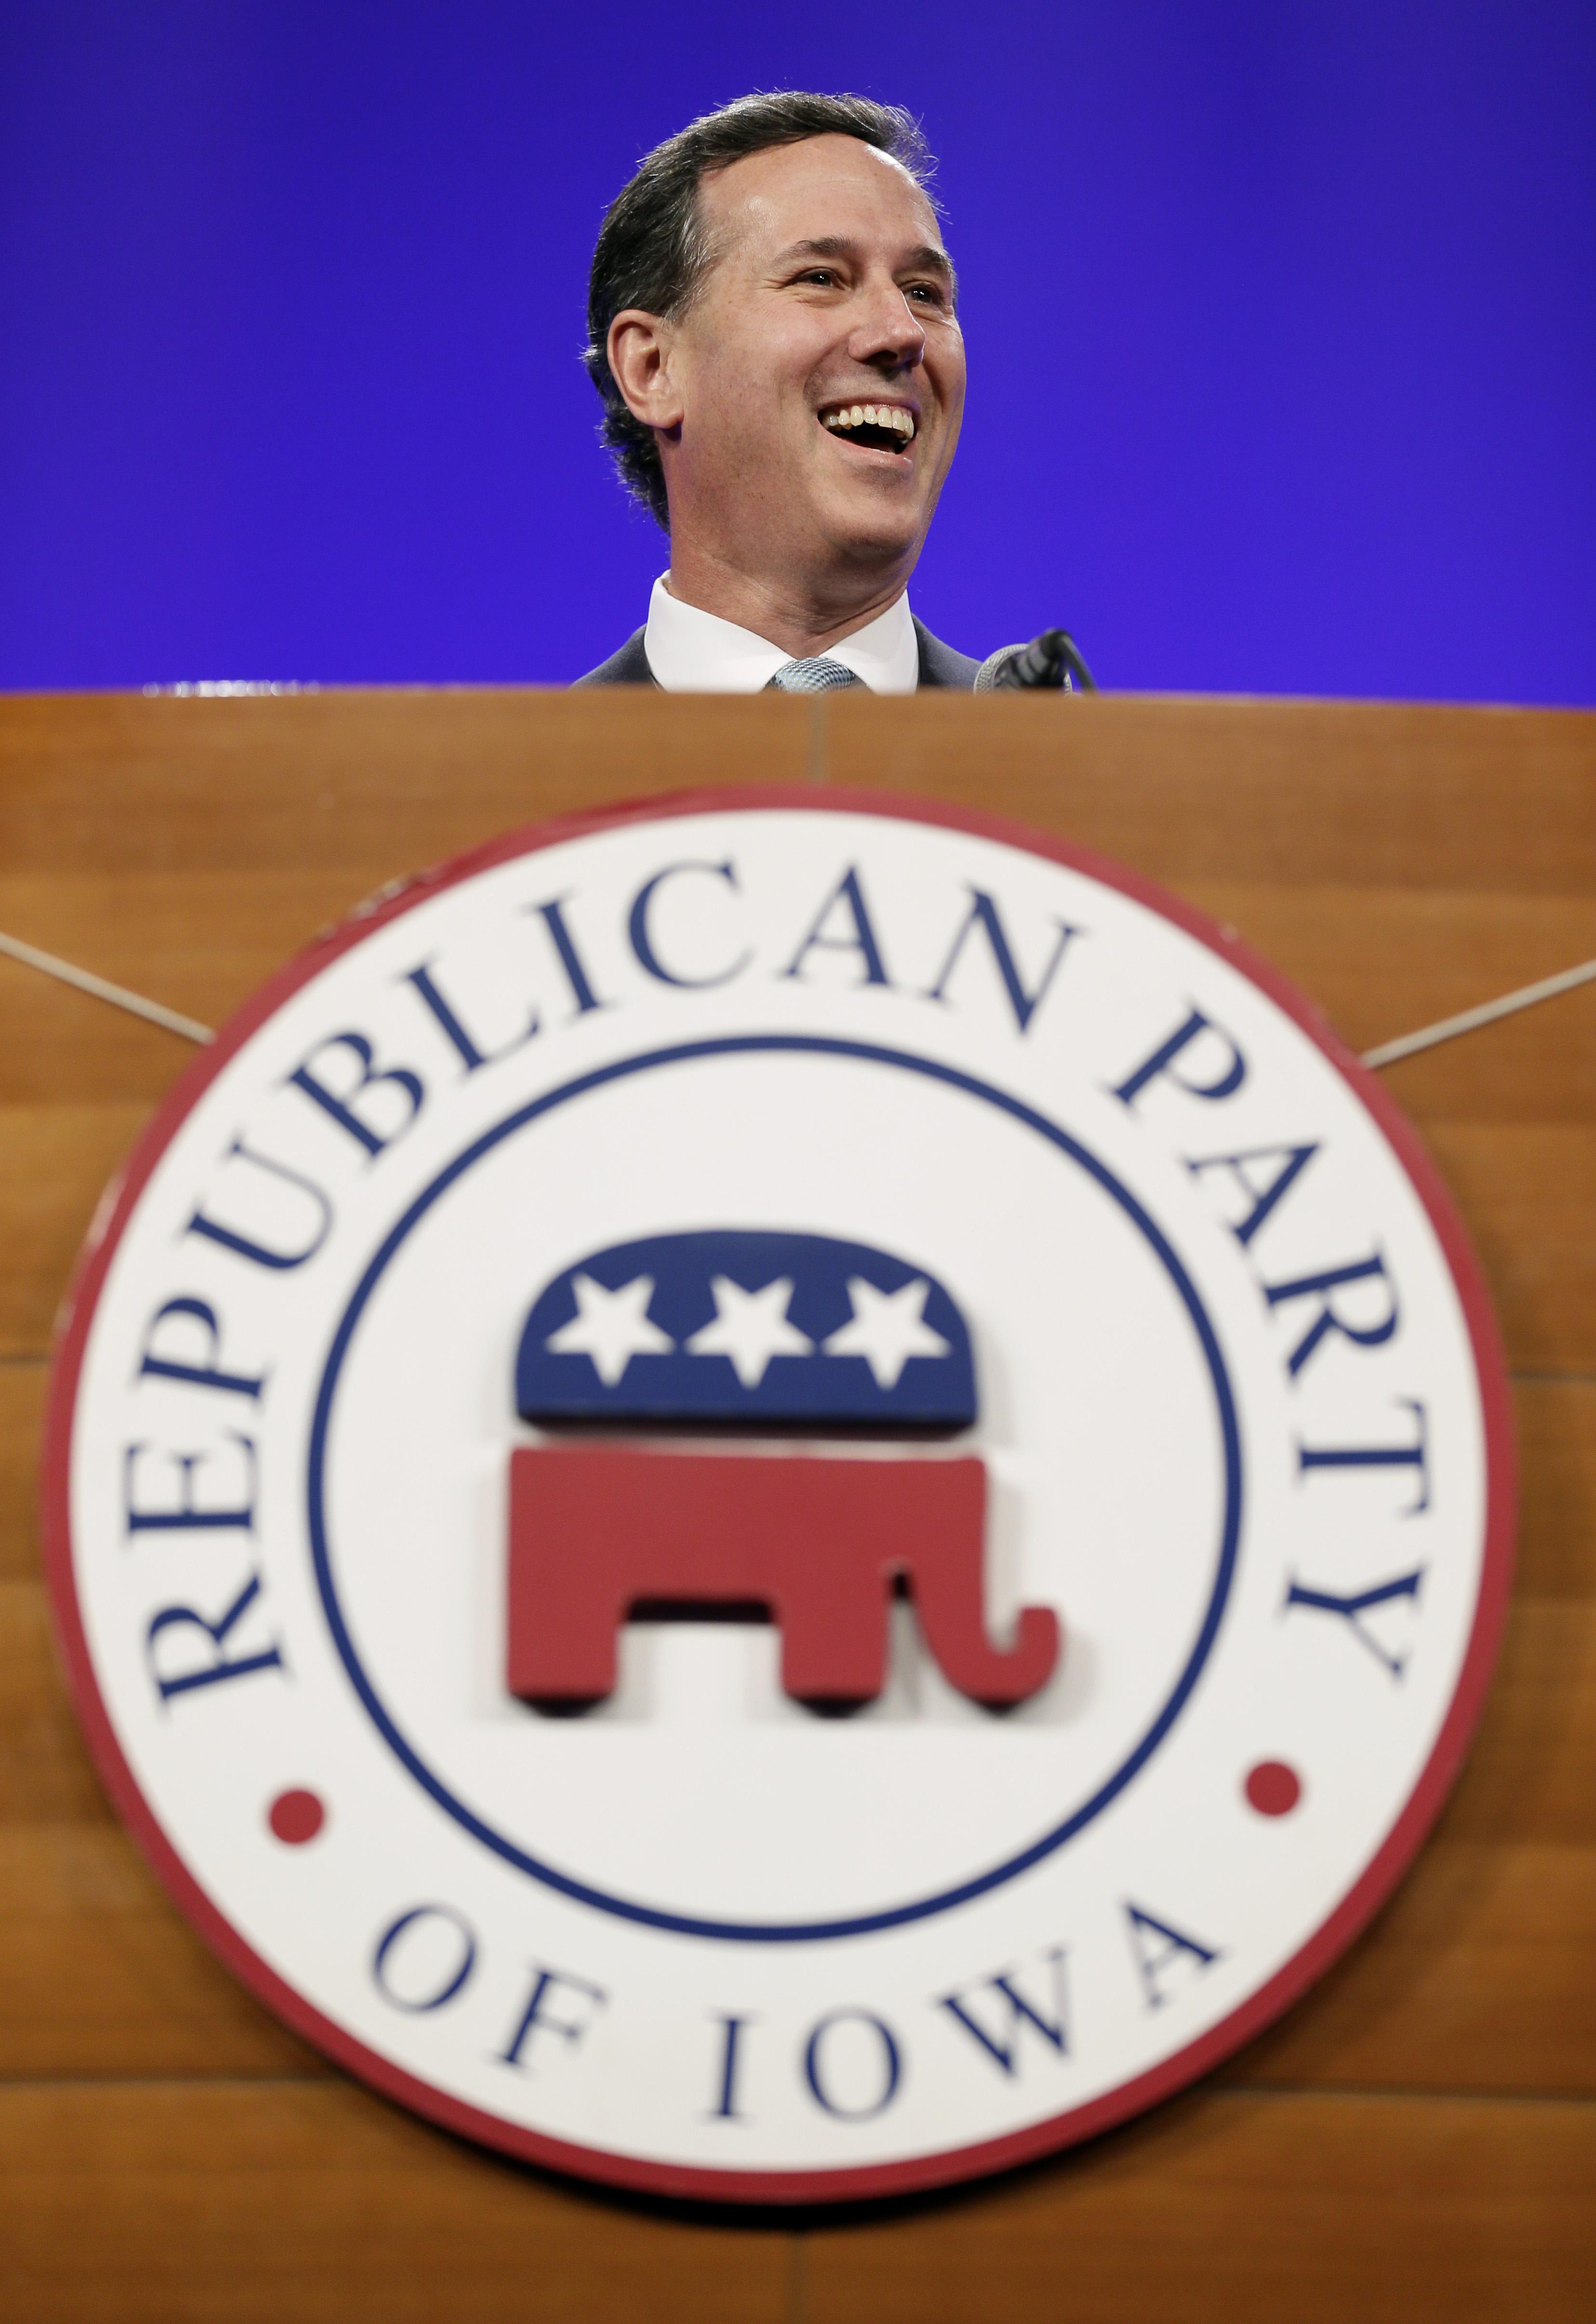 Former Pennsylvania Sen. Rick Santorum speaks during the Iowa Republican Party's Lincoln Dinner, on May 16, 2015, in Des Moines. (Charlie Neibergall—AP)